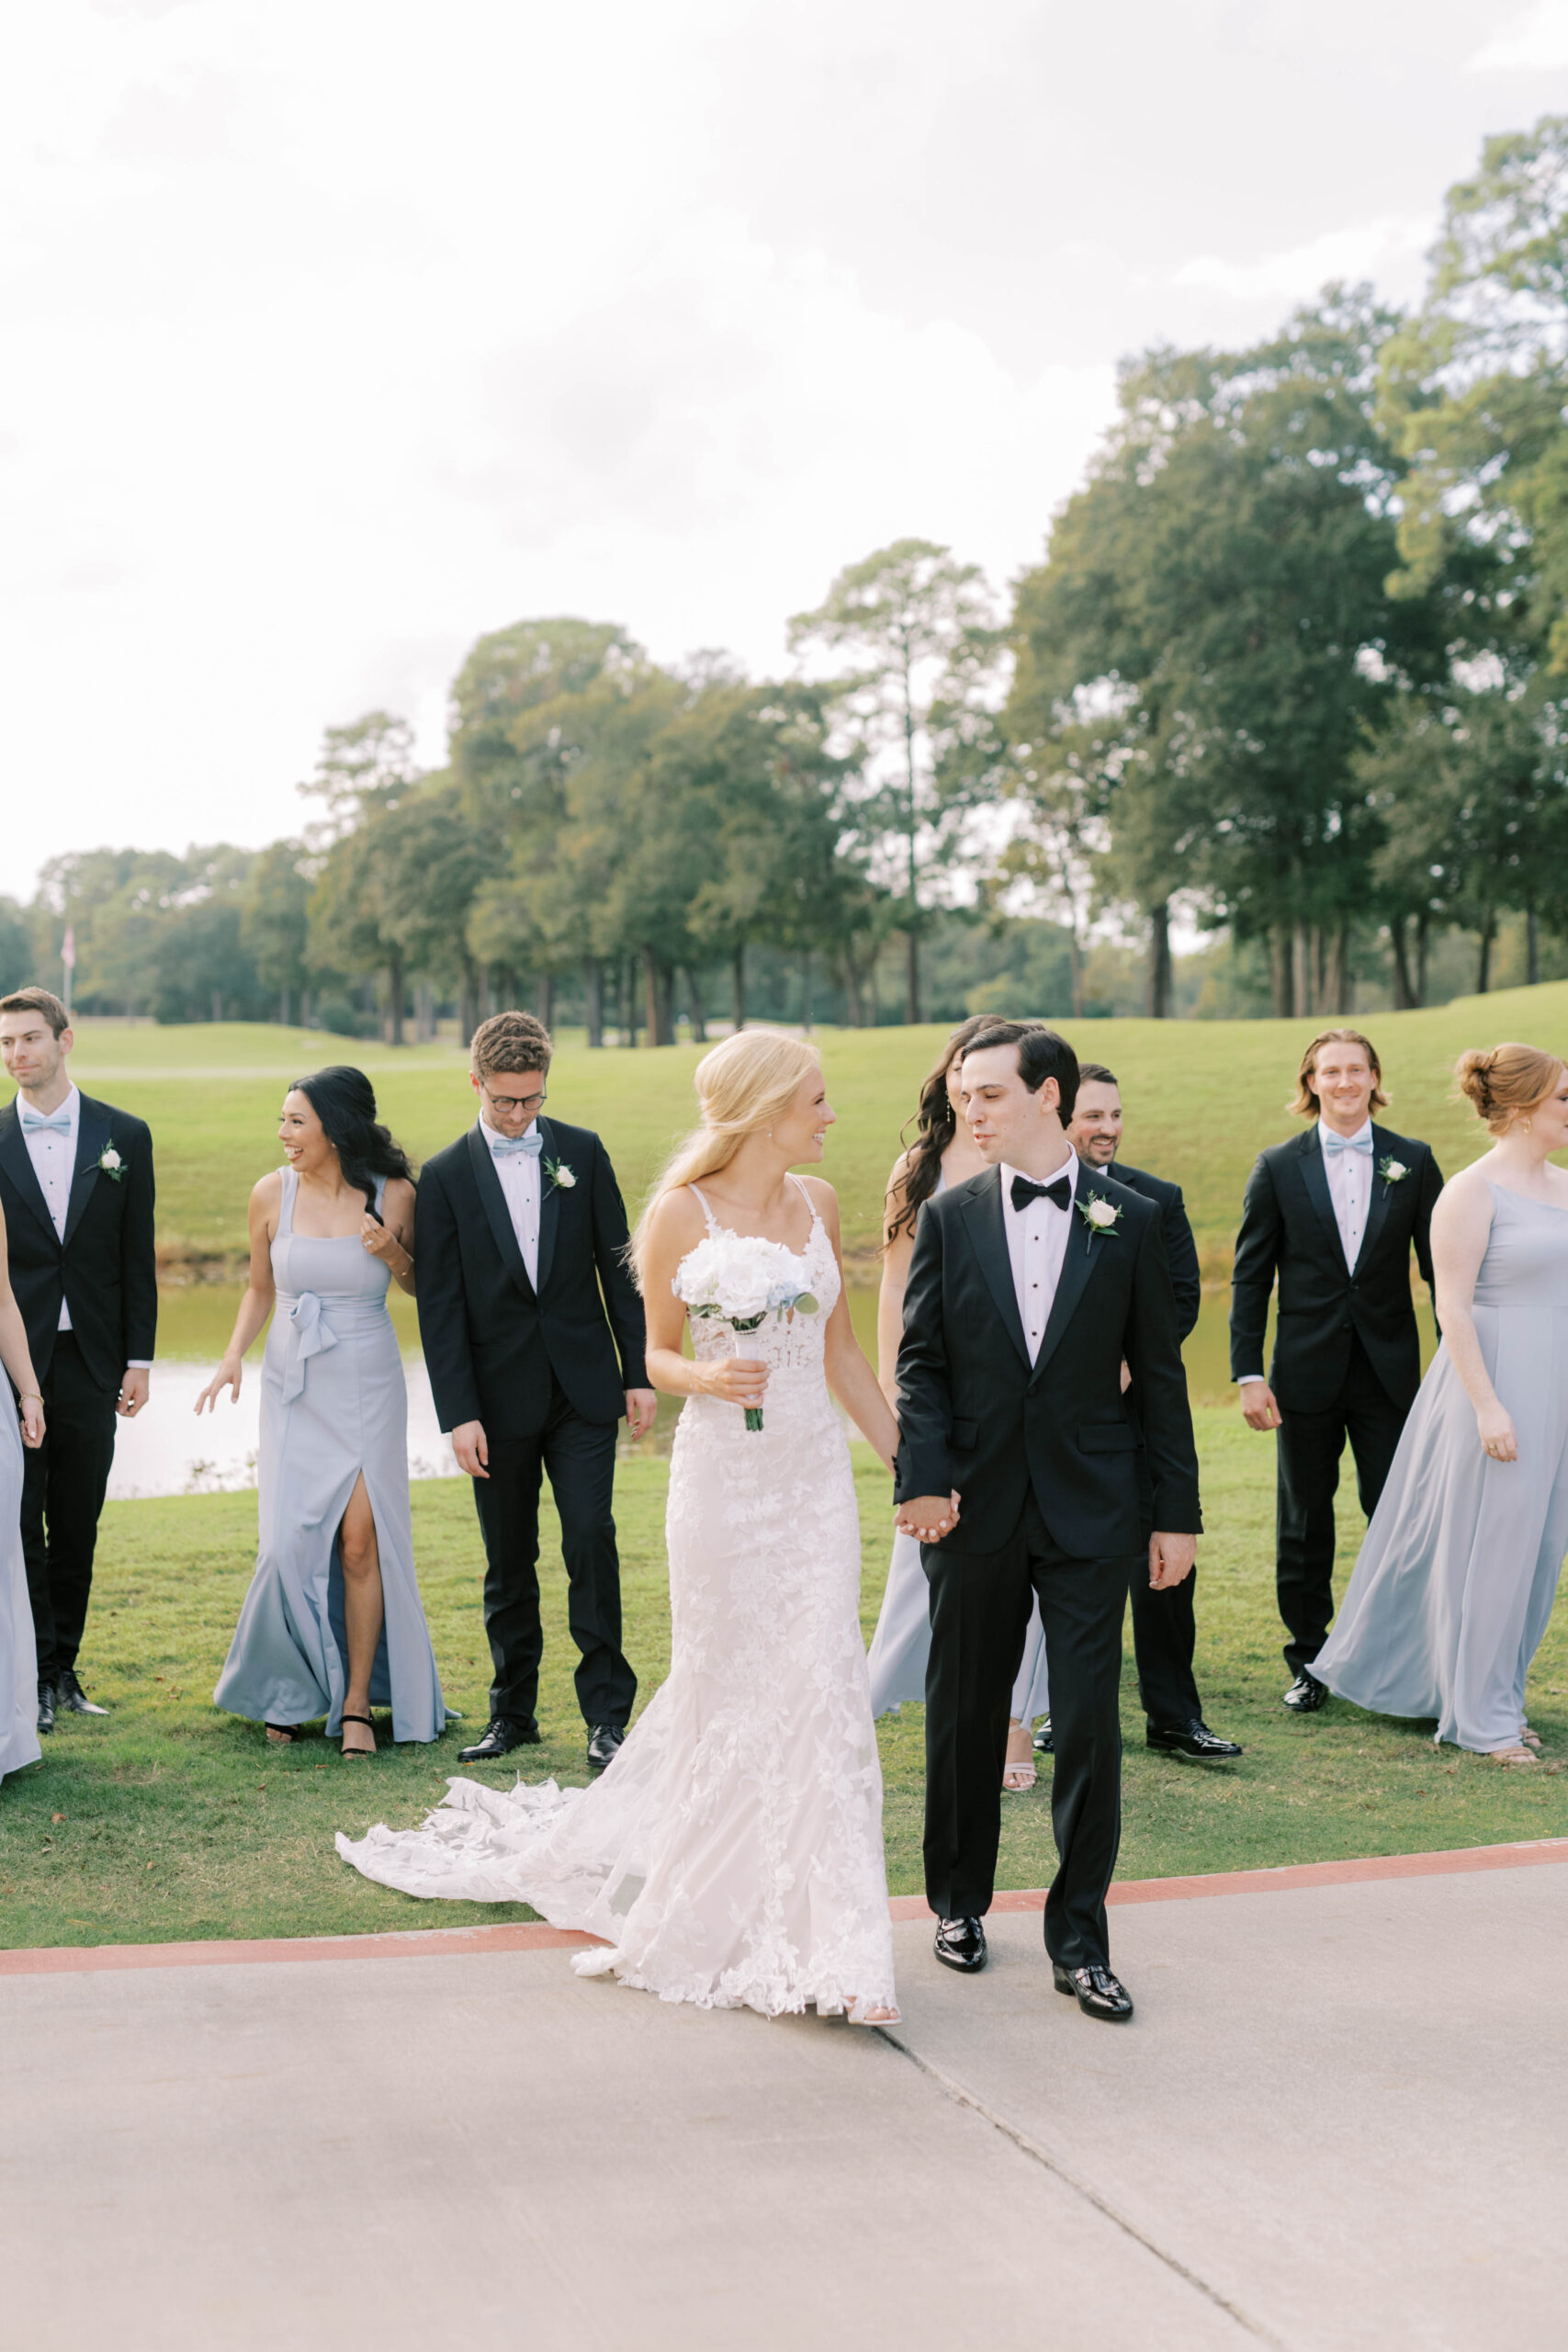 Wedding party portraits at The Woodlands Country Club golf course.